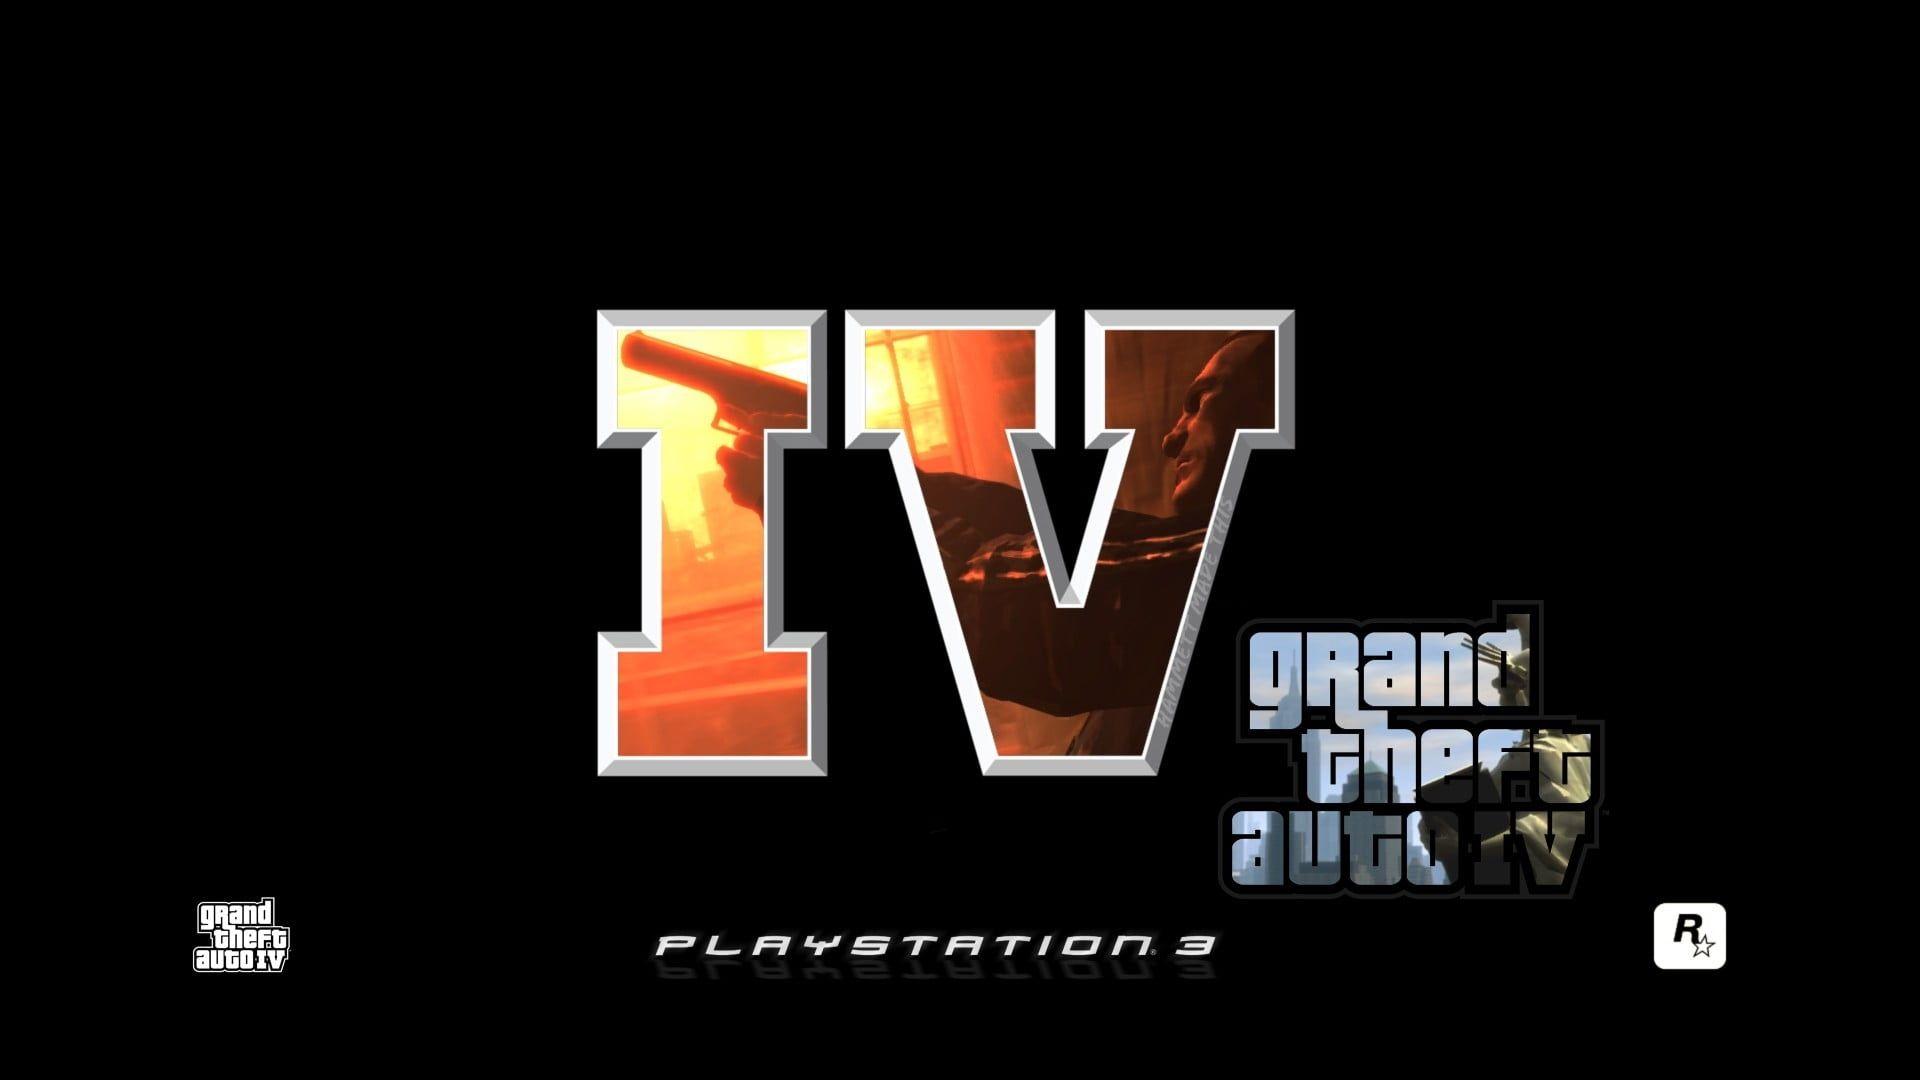 GTA 5: First gameplay trailer released by Rockstar, release date